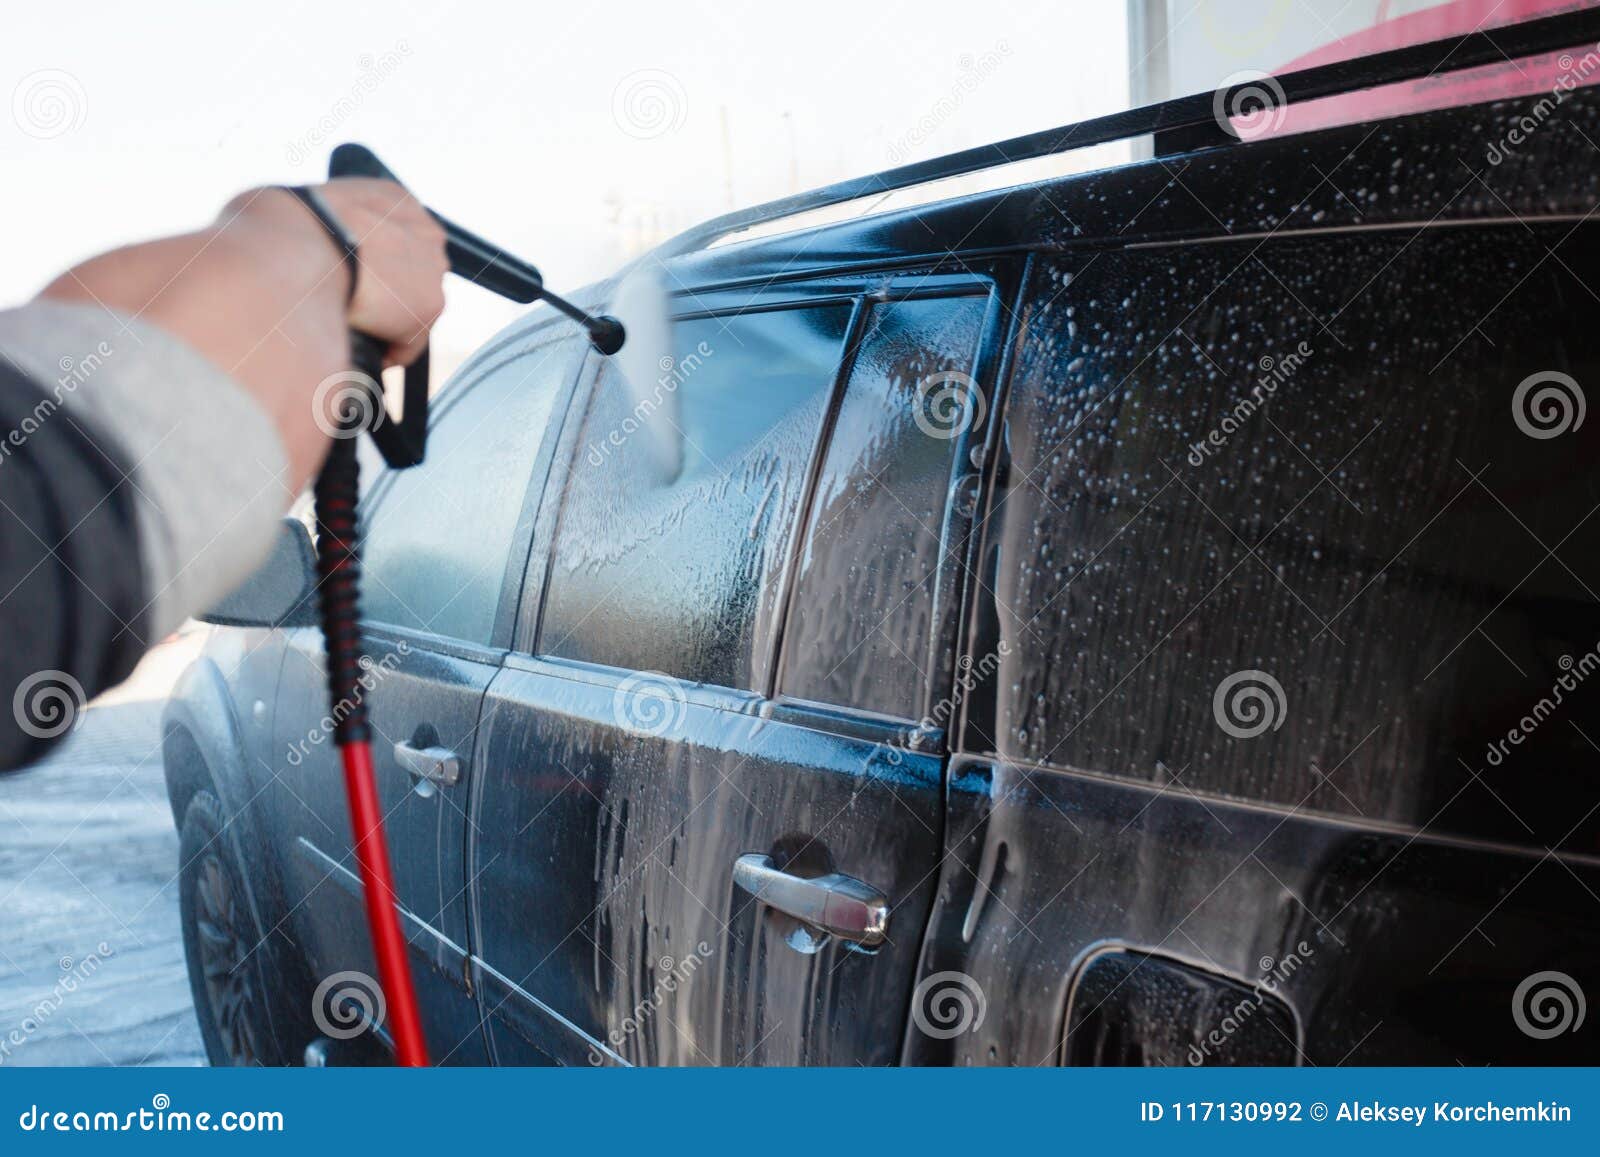 Men S Hand Wash Dirty SUV by High Pressure Wash. Touchless Car Wash  Self-service in the Open Air Stock Photo - Image of soap, garage: 117130992